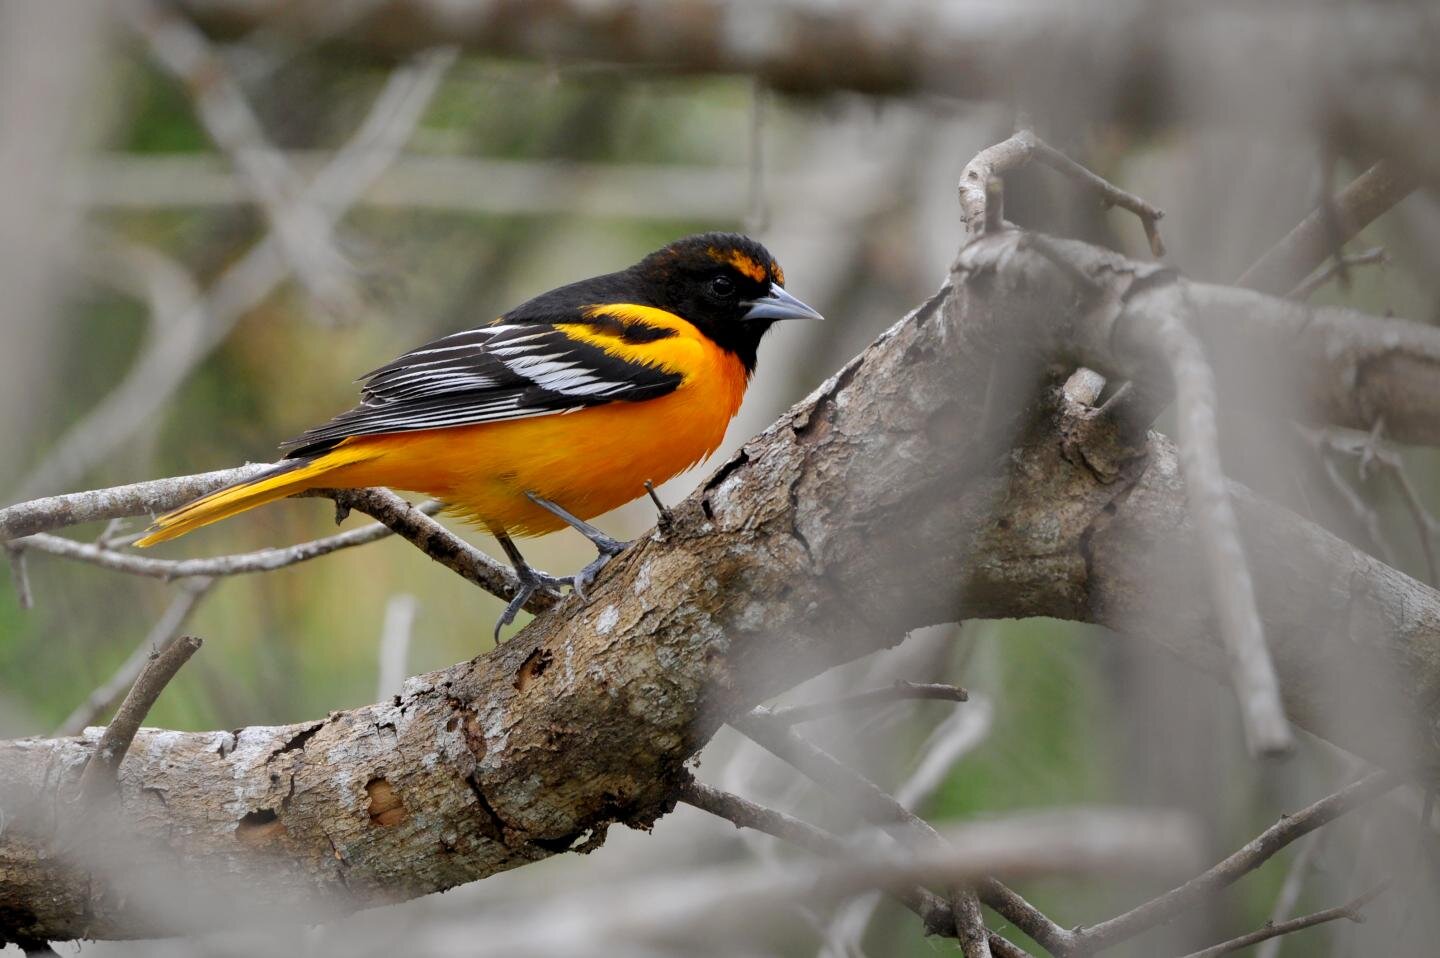 Similar Species to Orchard Oriole, All About Birds, Cornell Lab of